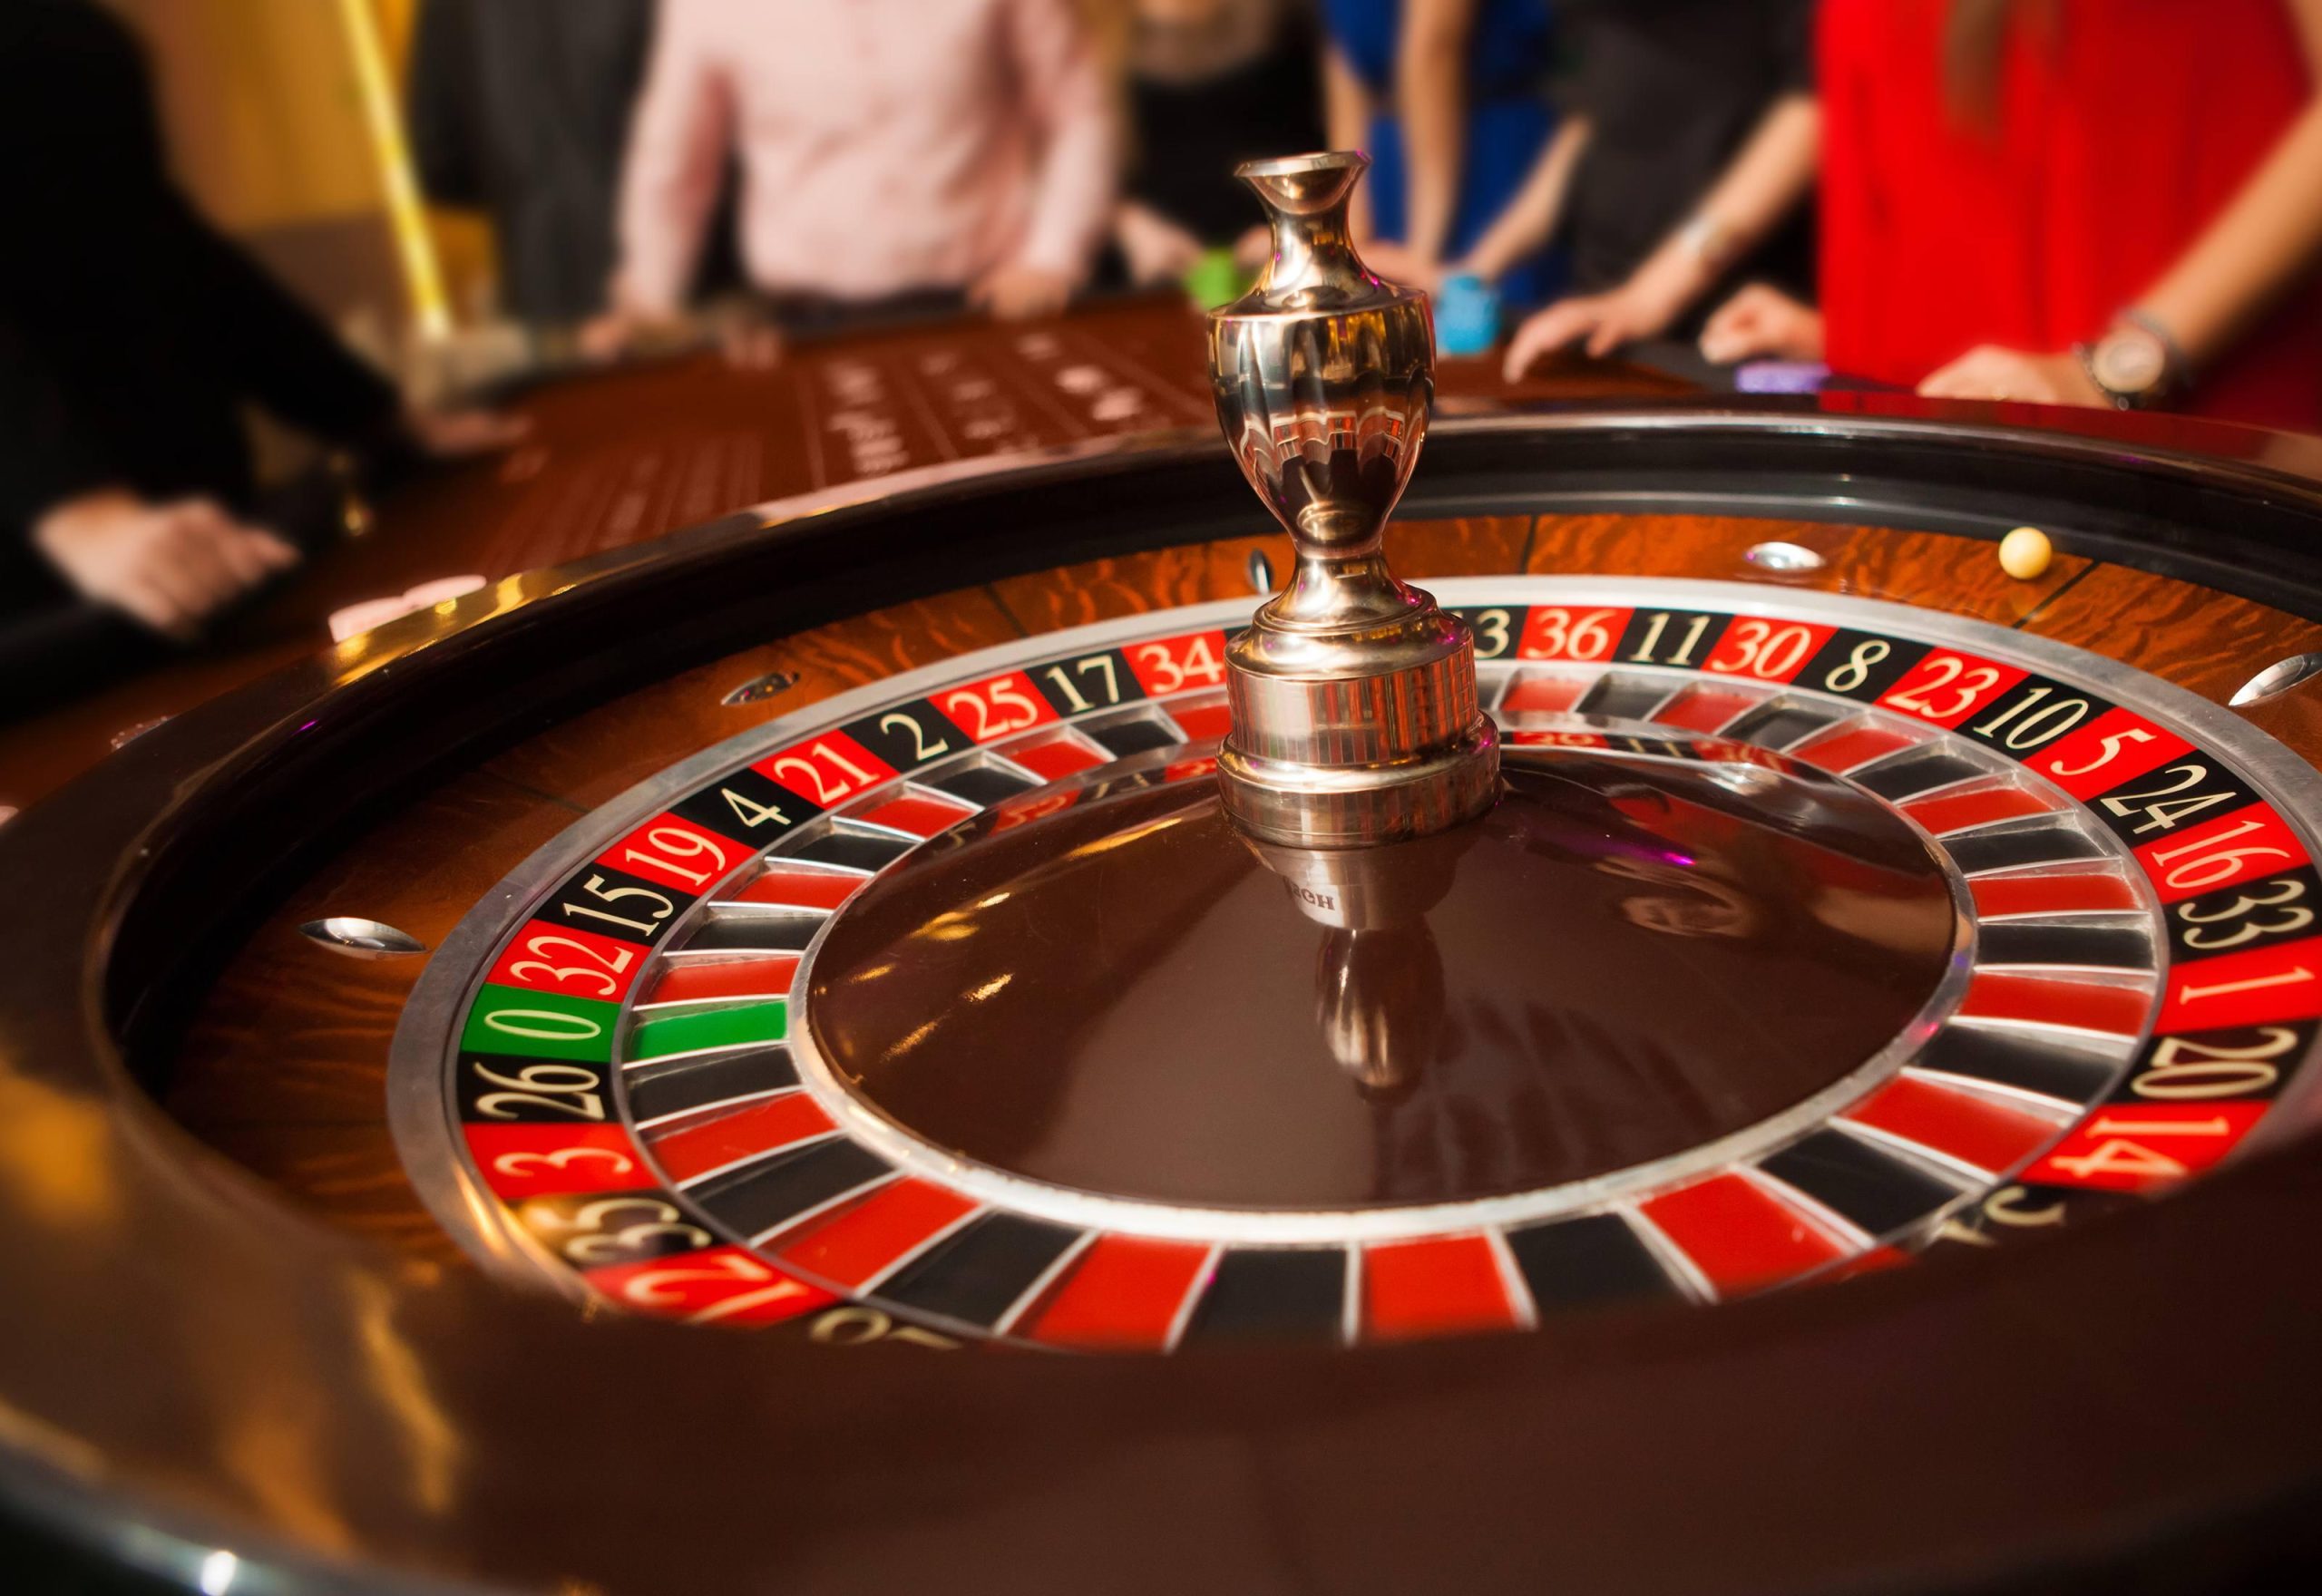 Reasons for Selecting Online Slot Games